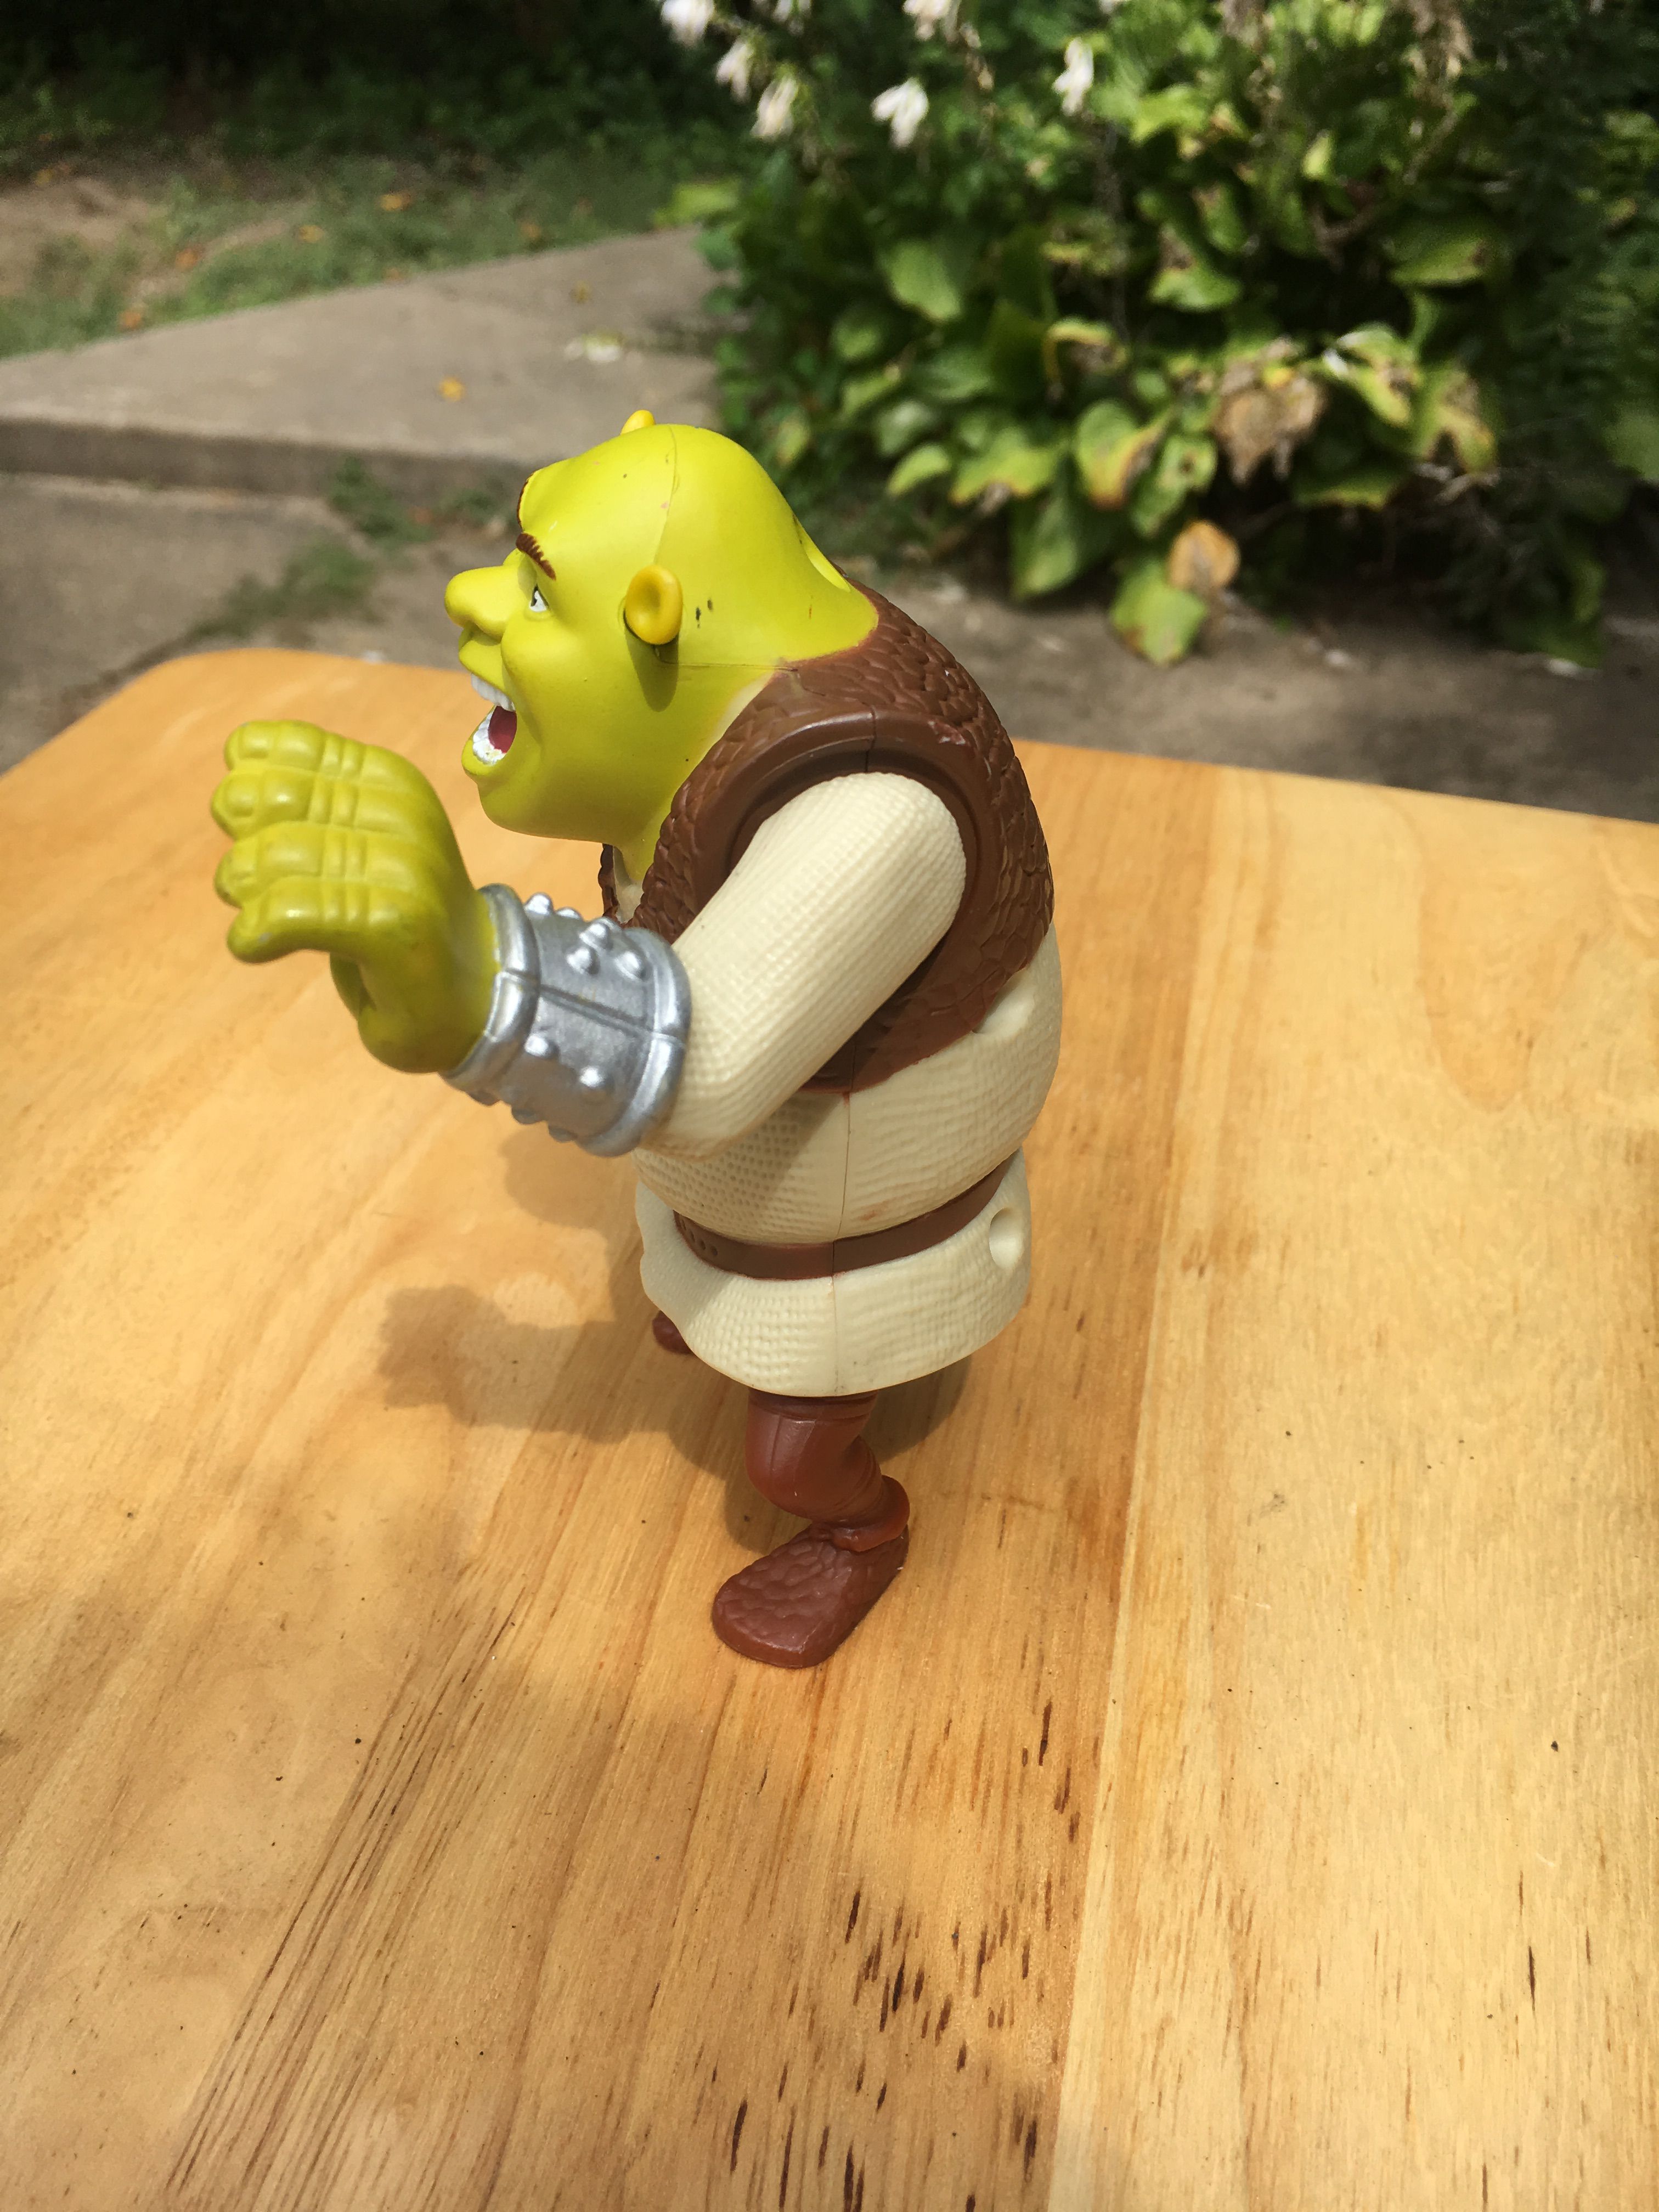 Shrek Action Figure Happy Meal Toy from McDonald's 2010 Collectible